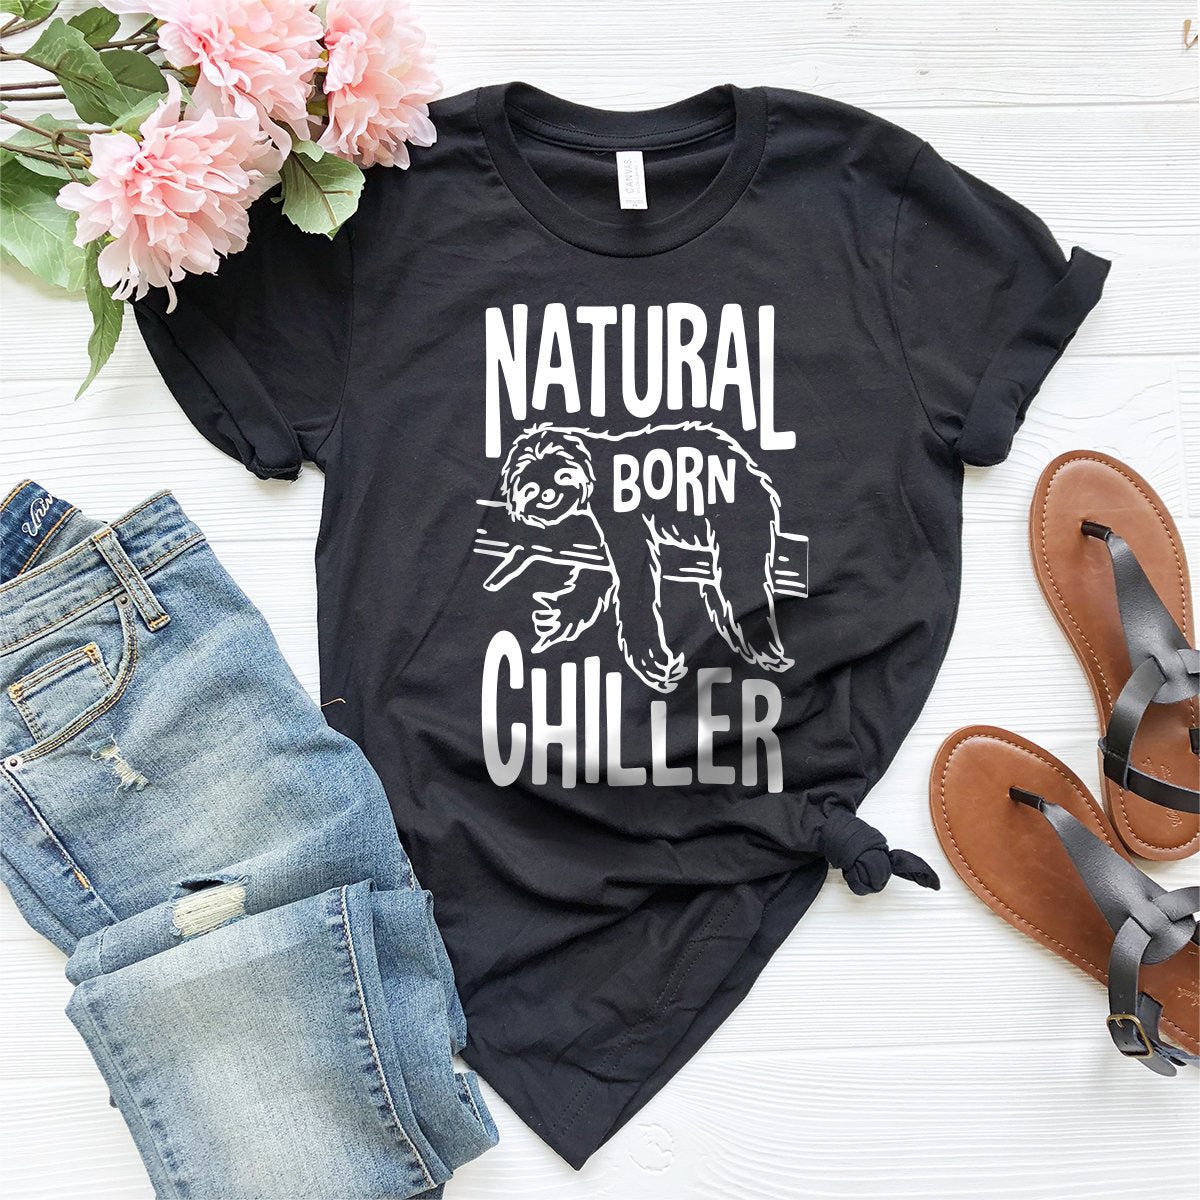 Natural Born Chiller T-Shirt, Sarcastic Shirt, Funny Sloth Shirt, Funny Chill Tshirt, Gift For Sloth Lover, Sloth Graphic Tee - Fastdeliverytees.com